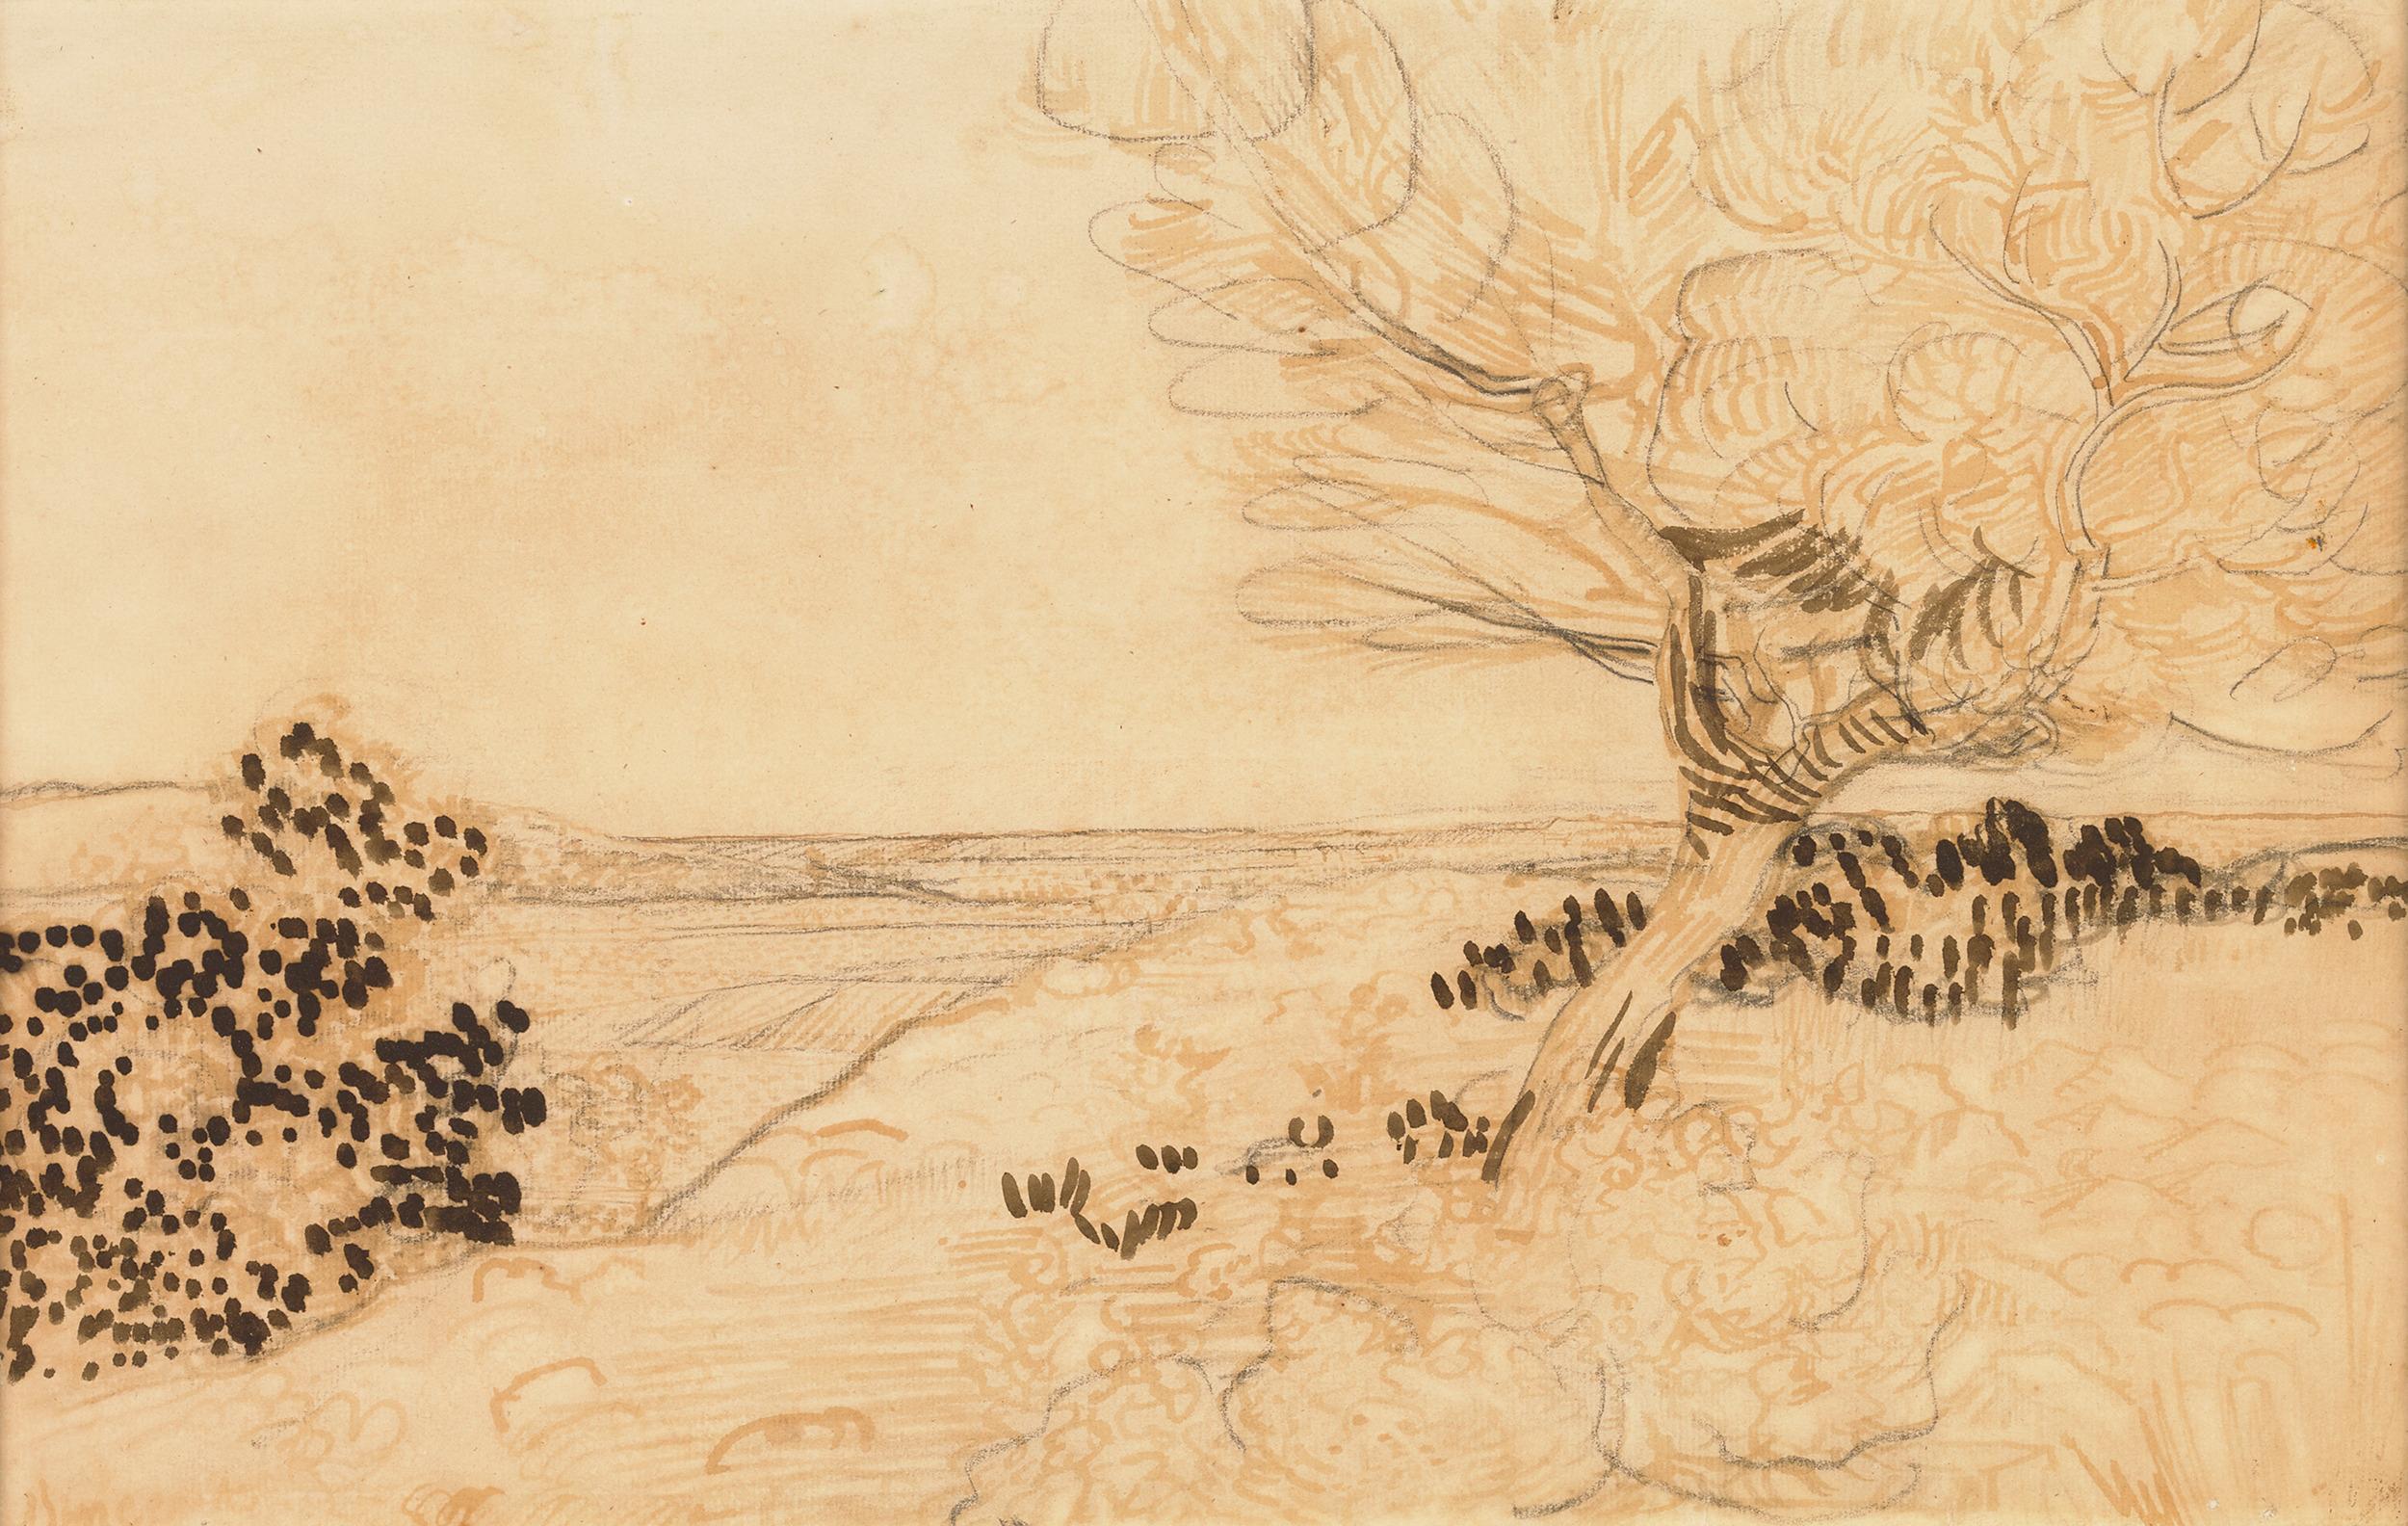 Vincent van Gogh
1853-1890  Dutch

View of La Crau with Tree in the Foreground

Signed "Vincent" (lower left)
Pencil, Reed Pen and Ink on Paper

“In my opinion the two views of the Crau and of the country on the banks of the Rhone are the best